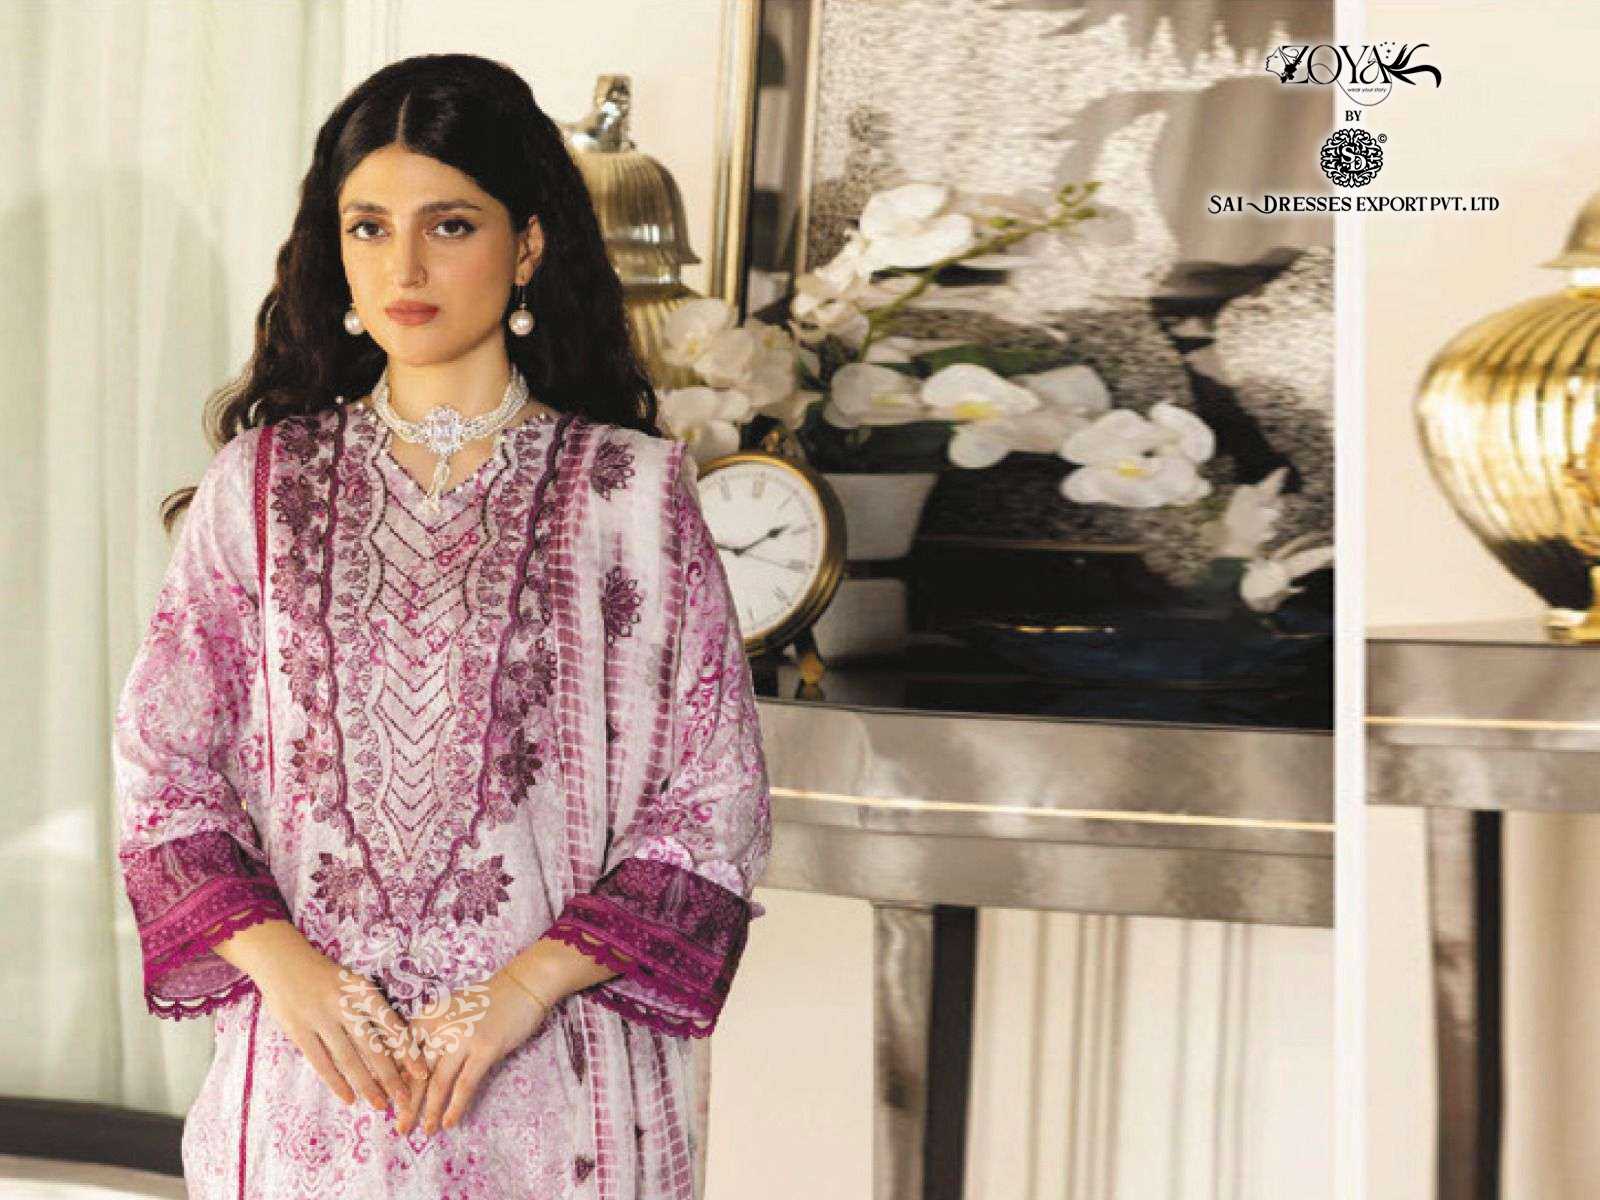 SAI DRESSES PRESENT MAHERUH PURE COTTON WITH SELF EMBROIDERED PAKISTANI DESIGNER SALWAR SUITS IN WHOLESALE RATE IN SURAT